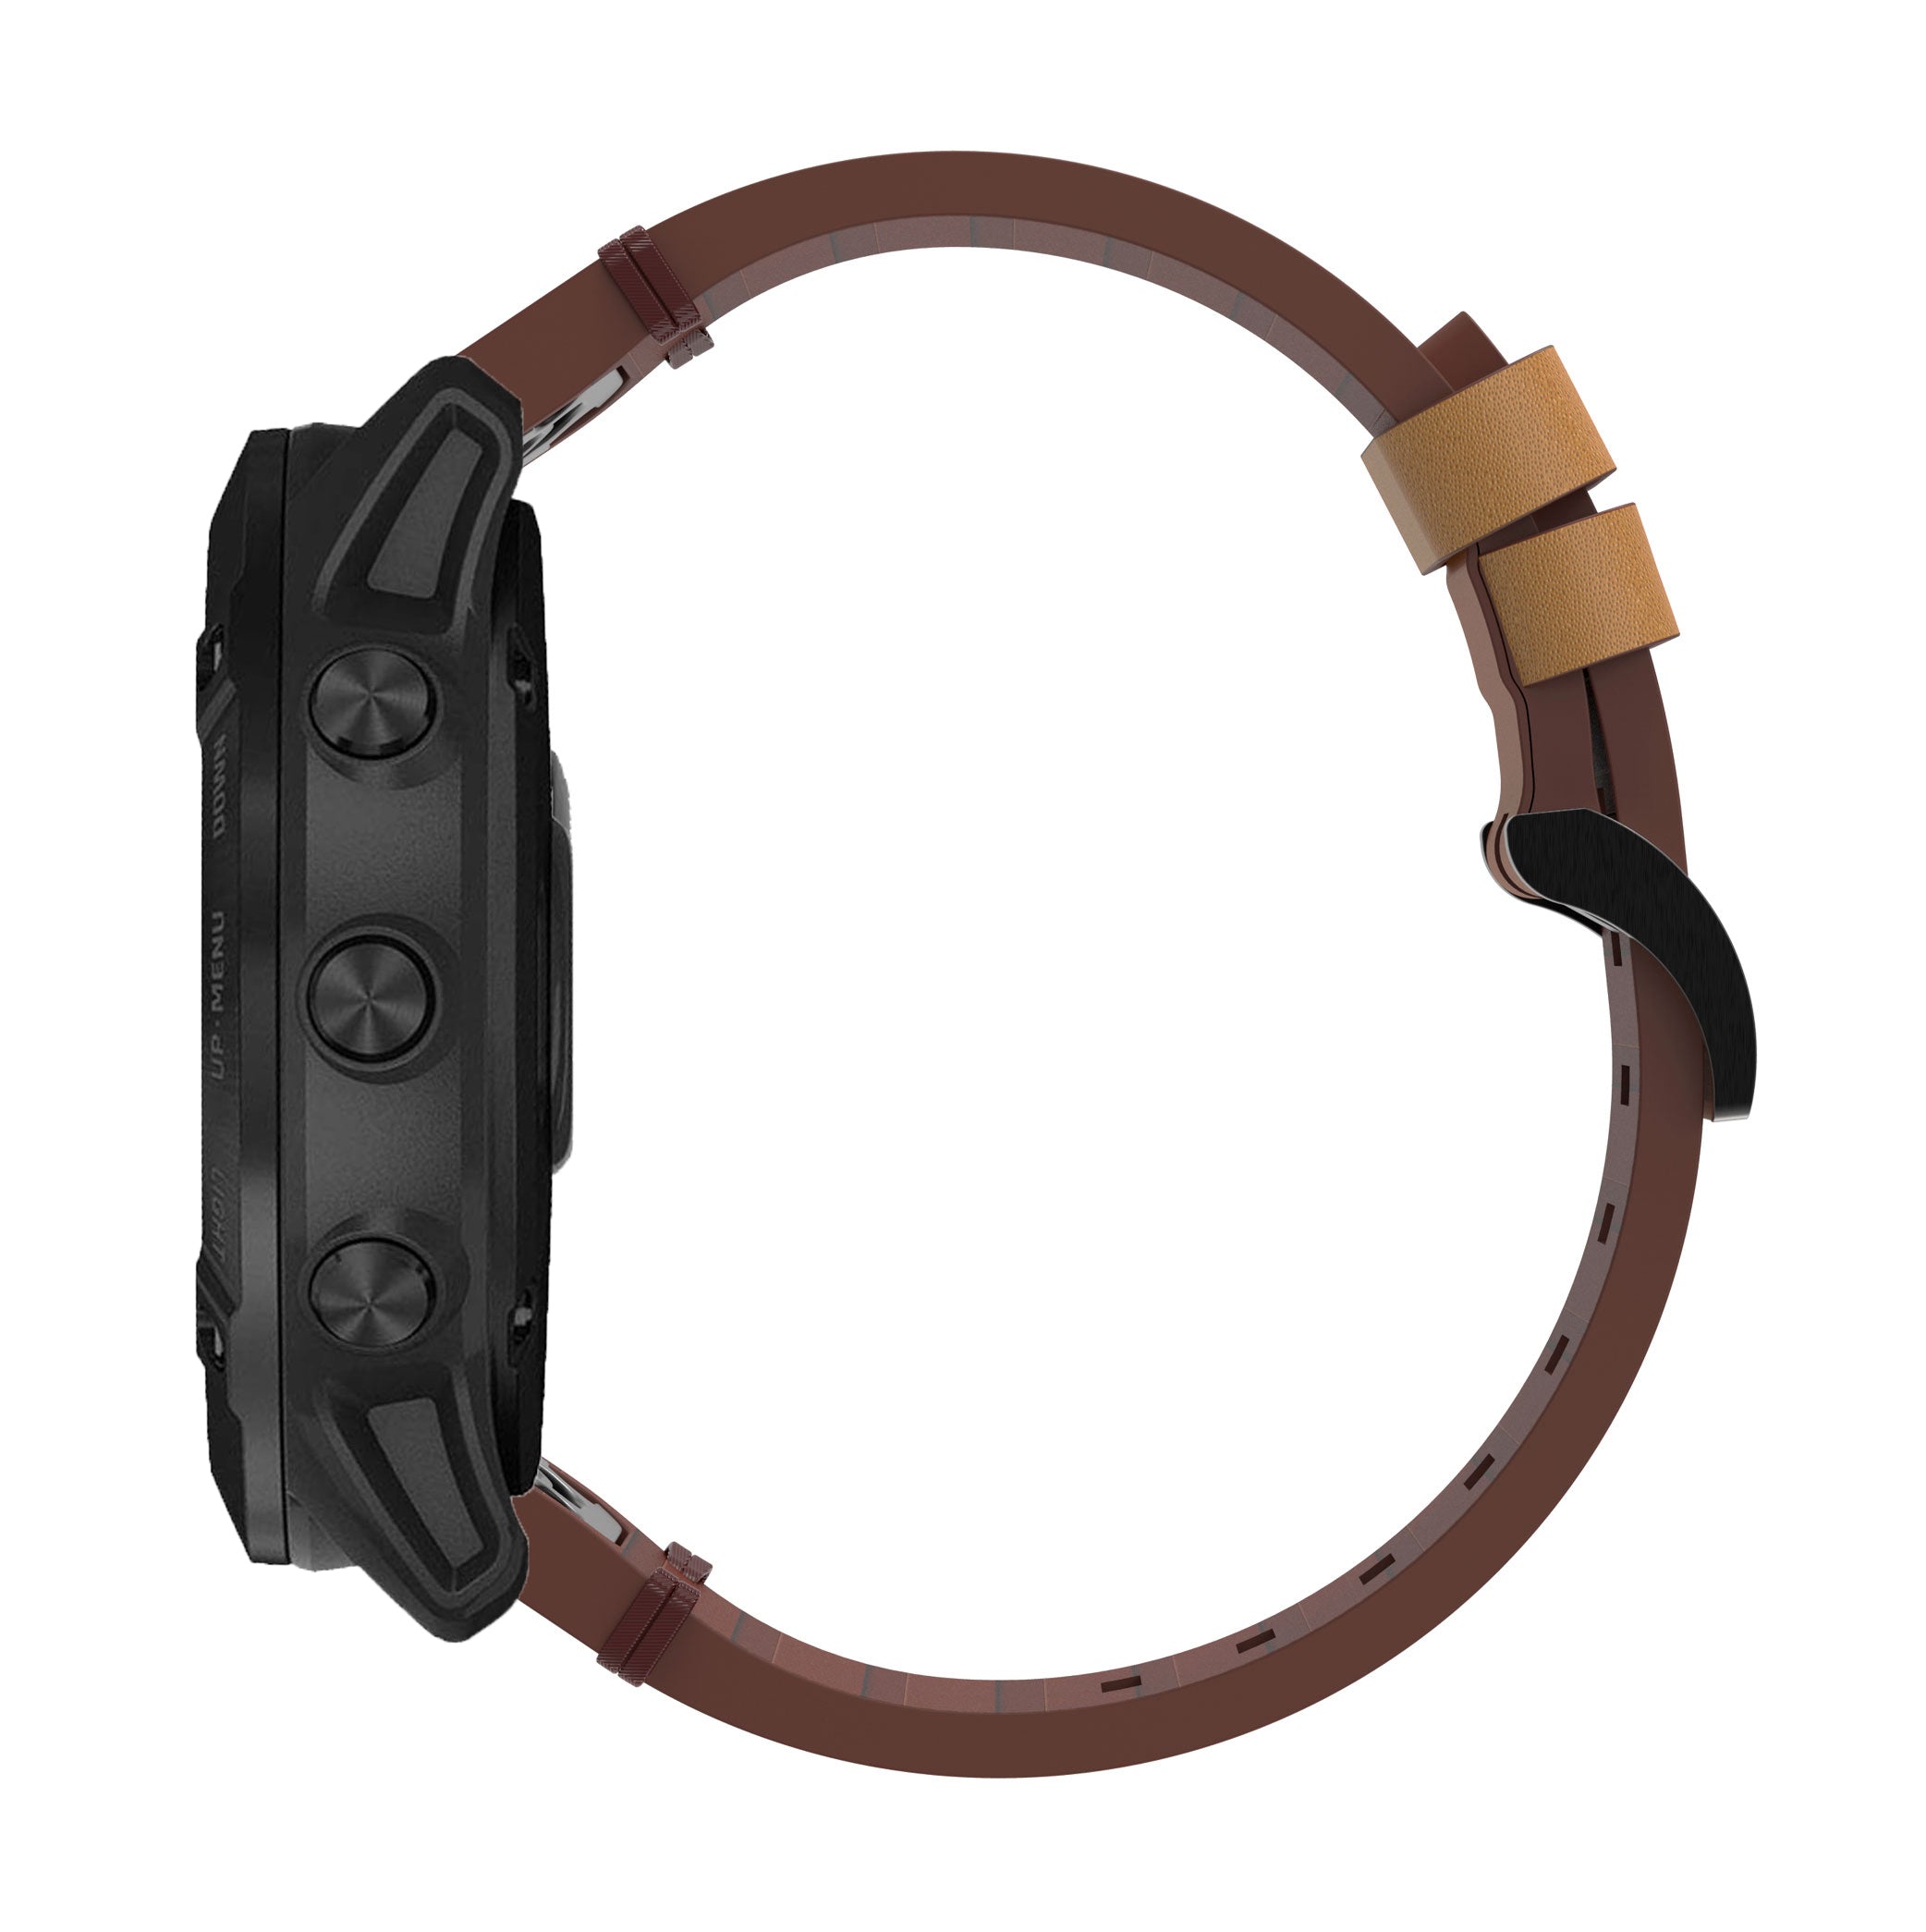 [QuickFit] Leather - Brown 20mm